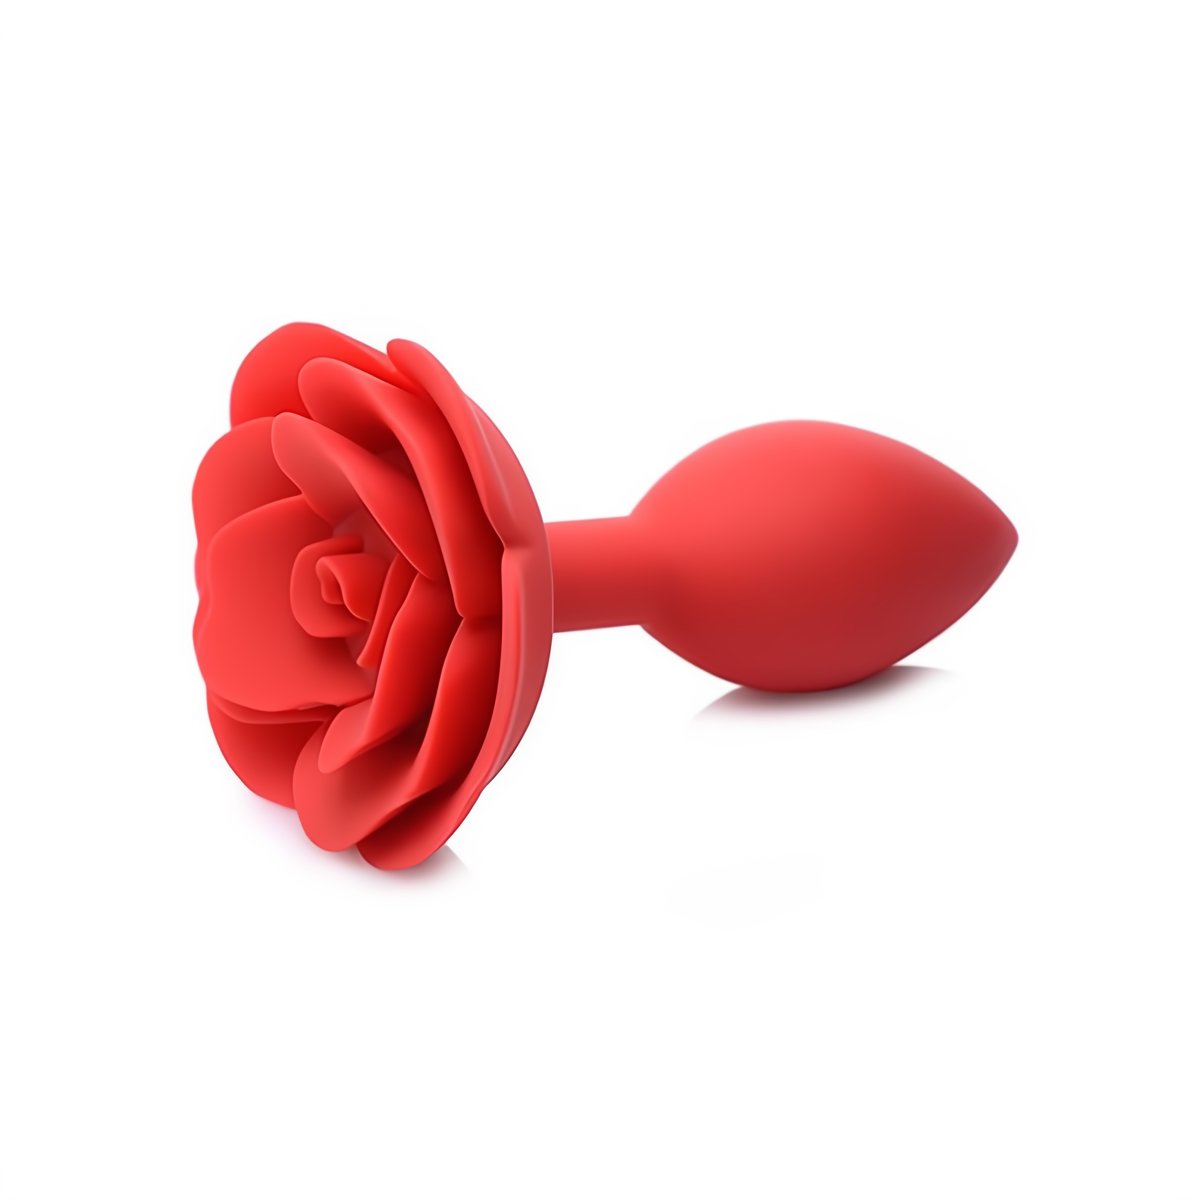 Booty Bloom - Silicone Rose Anal Plug - Red - EroticToyzProducten,Toys,Anaal Toys,Buttplugs Anale Dildo's,Buttplugs Anale Dildo's Niet Vibrerend,,GeslachtsneutraalXR Brands